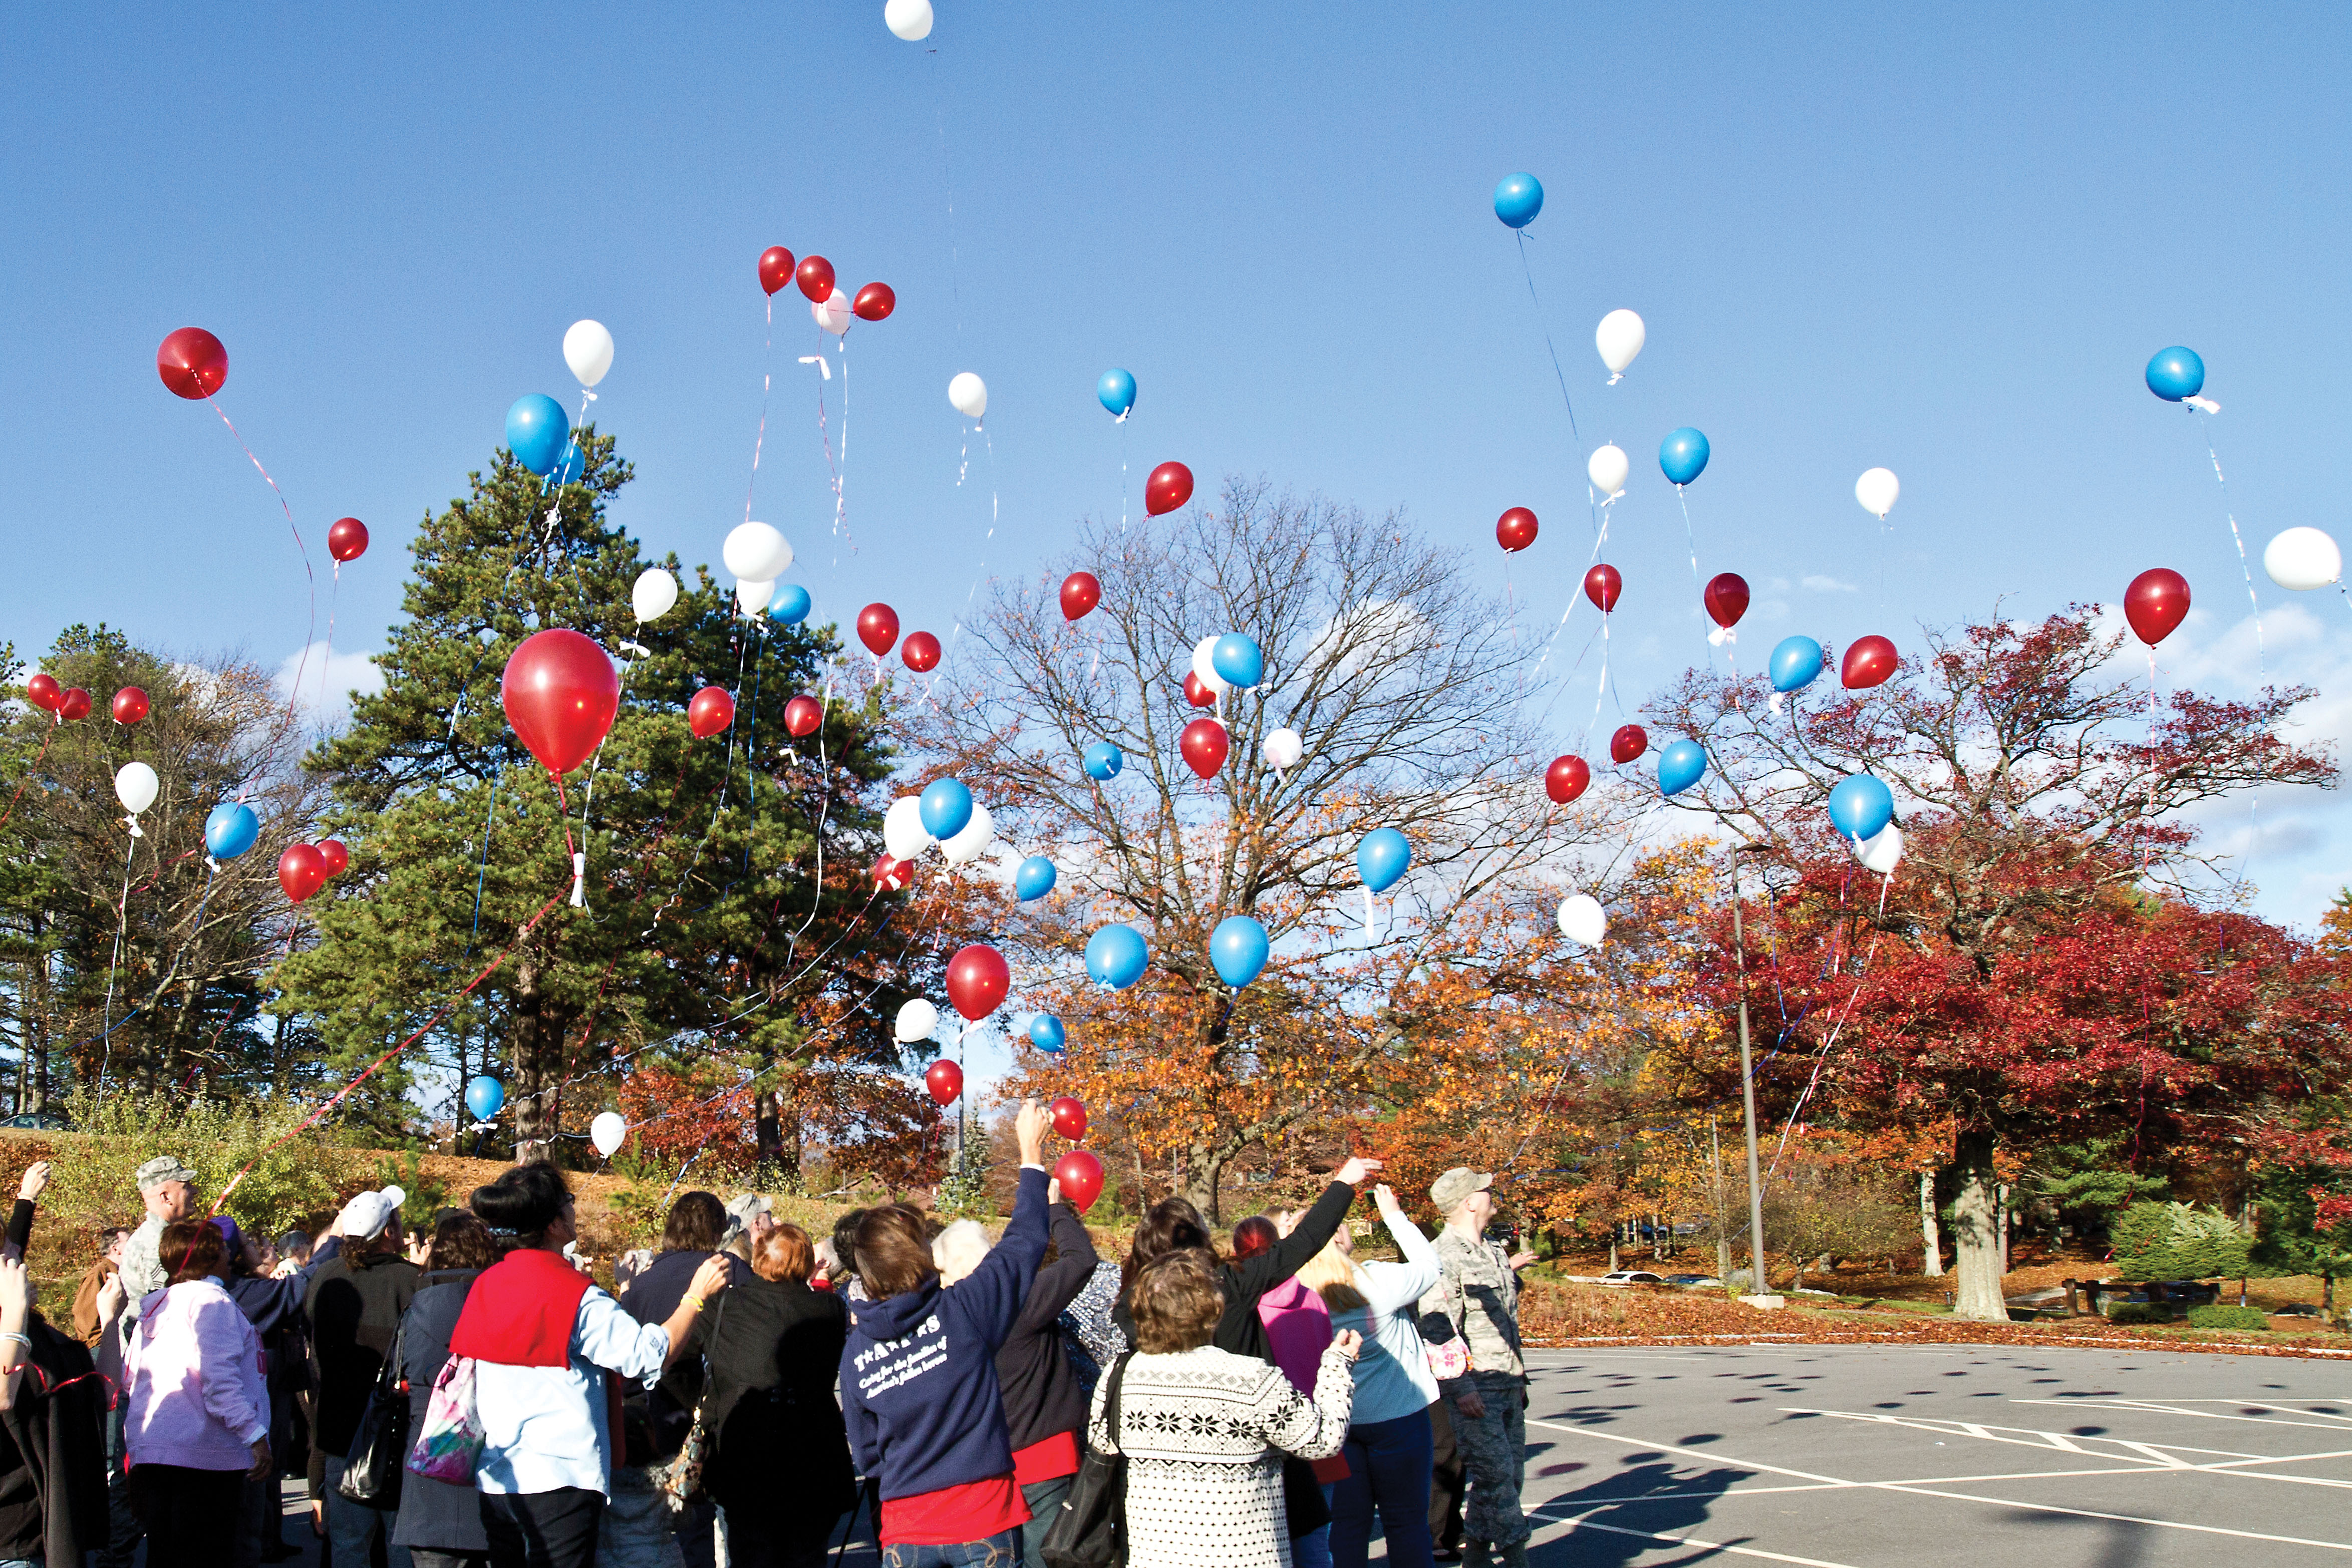 A USO/TAPS camp in Boston earlier this year ended with a balloon release. The balloons are released in remembrance of loved ones who died. USO photo by Michael A. Clifton